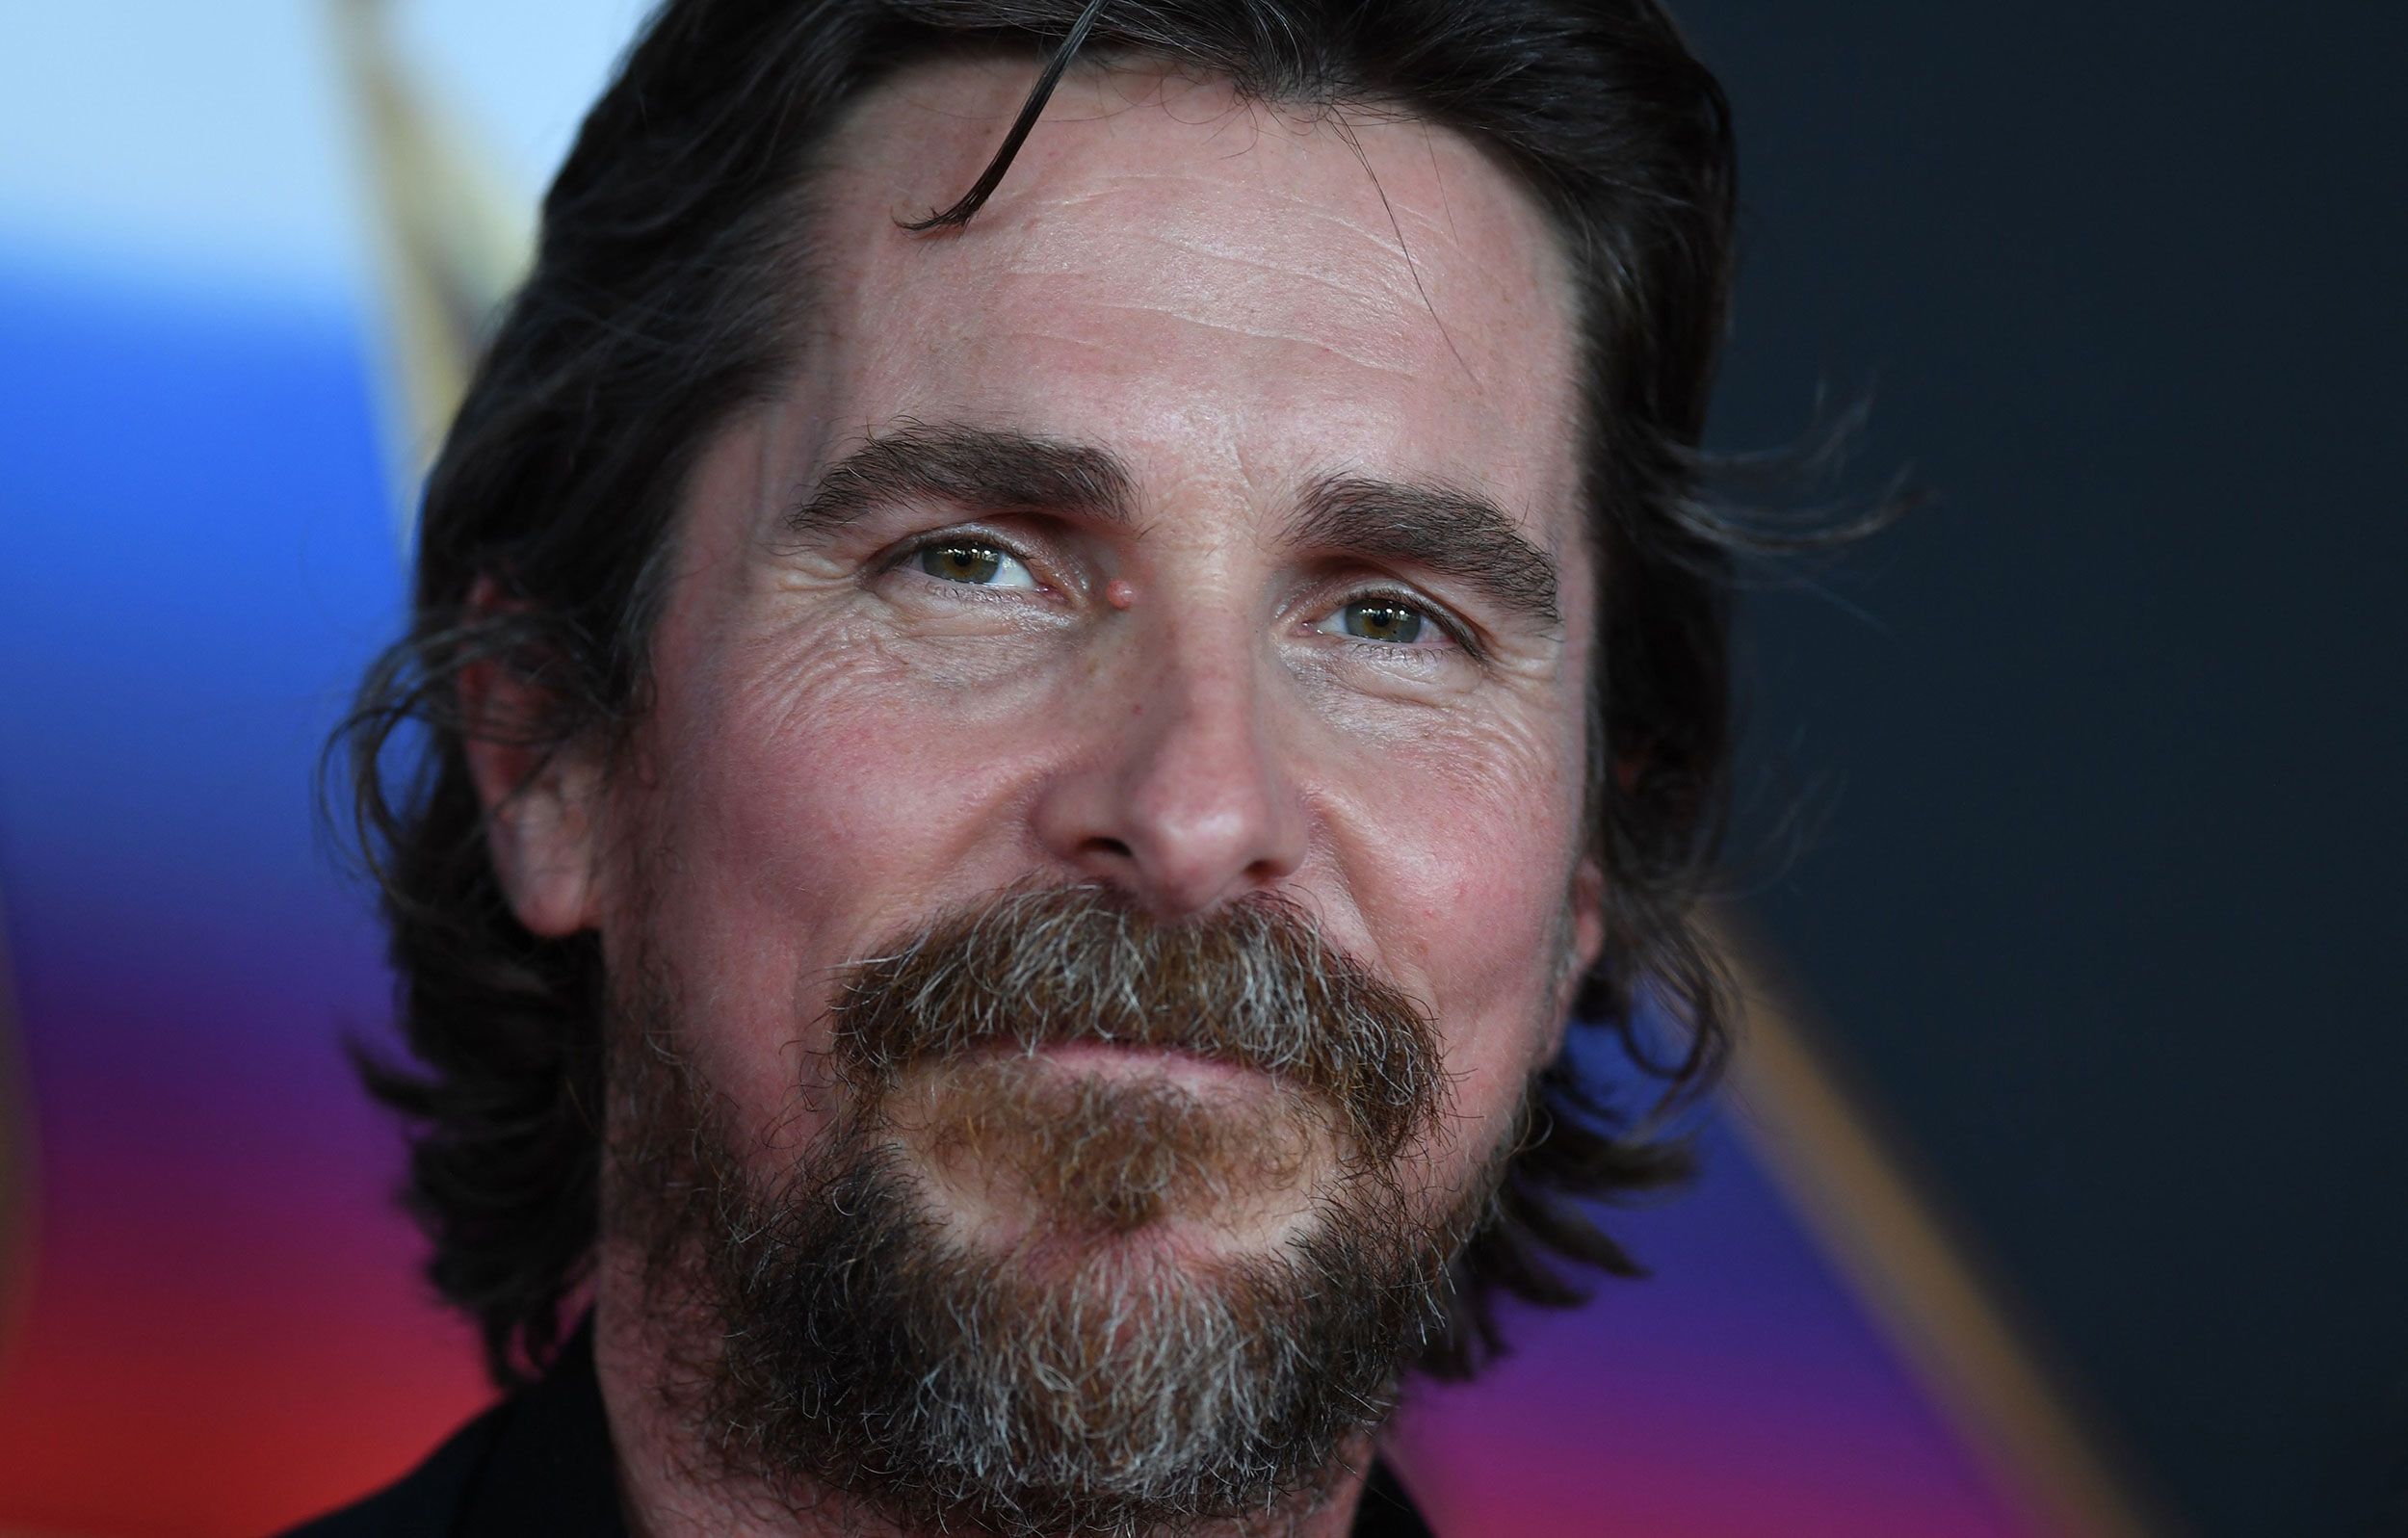 Christian Bale says people 'laughed' at idea of serious approach to Batman  role | CNN